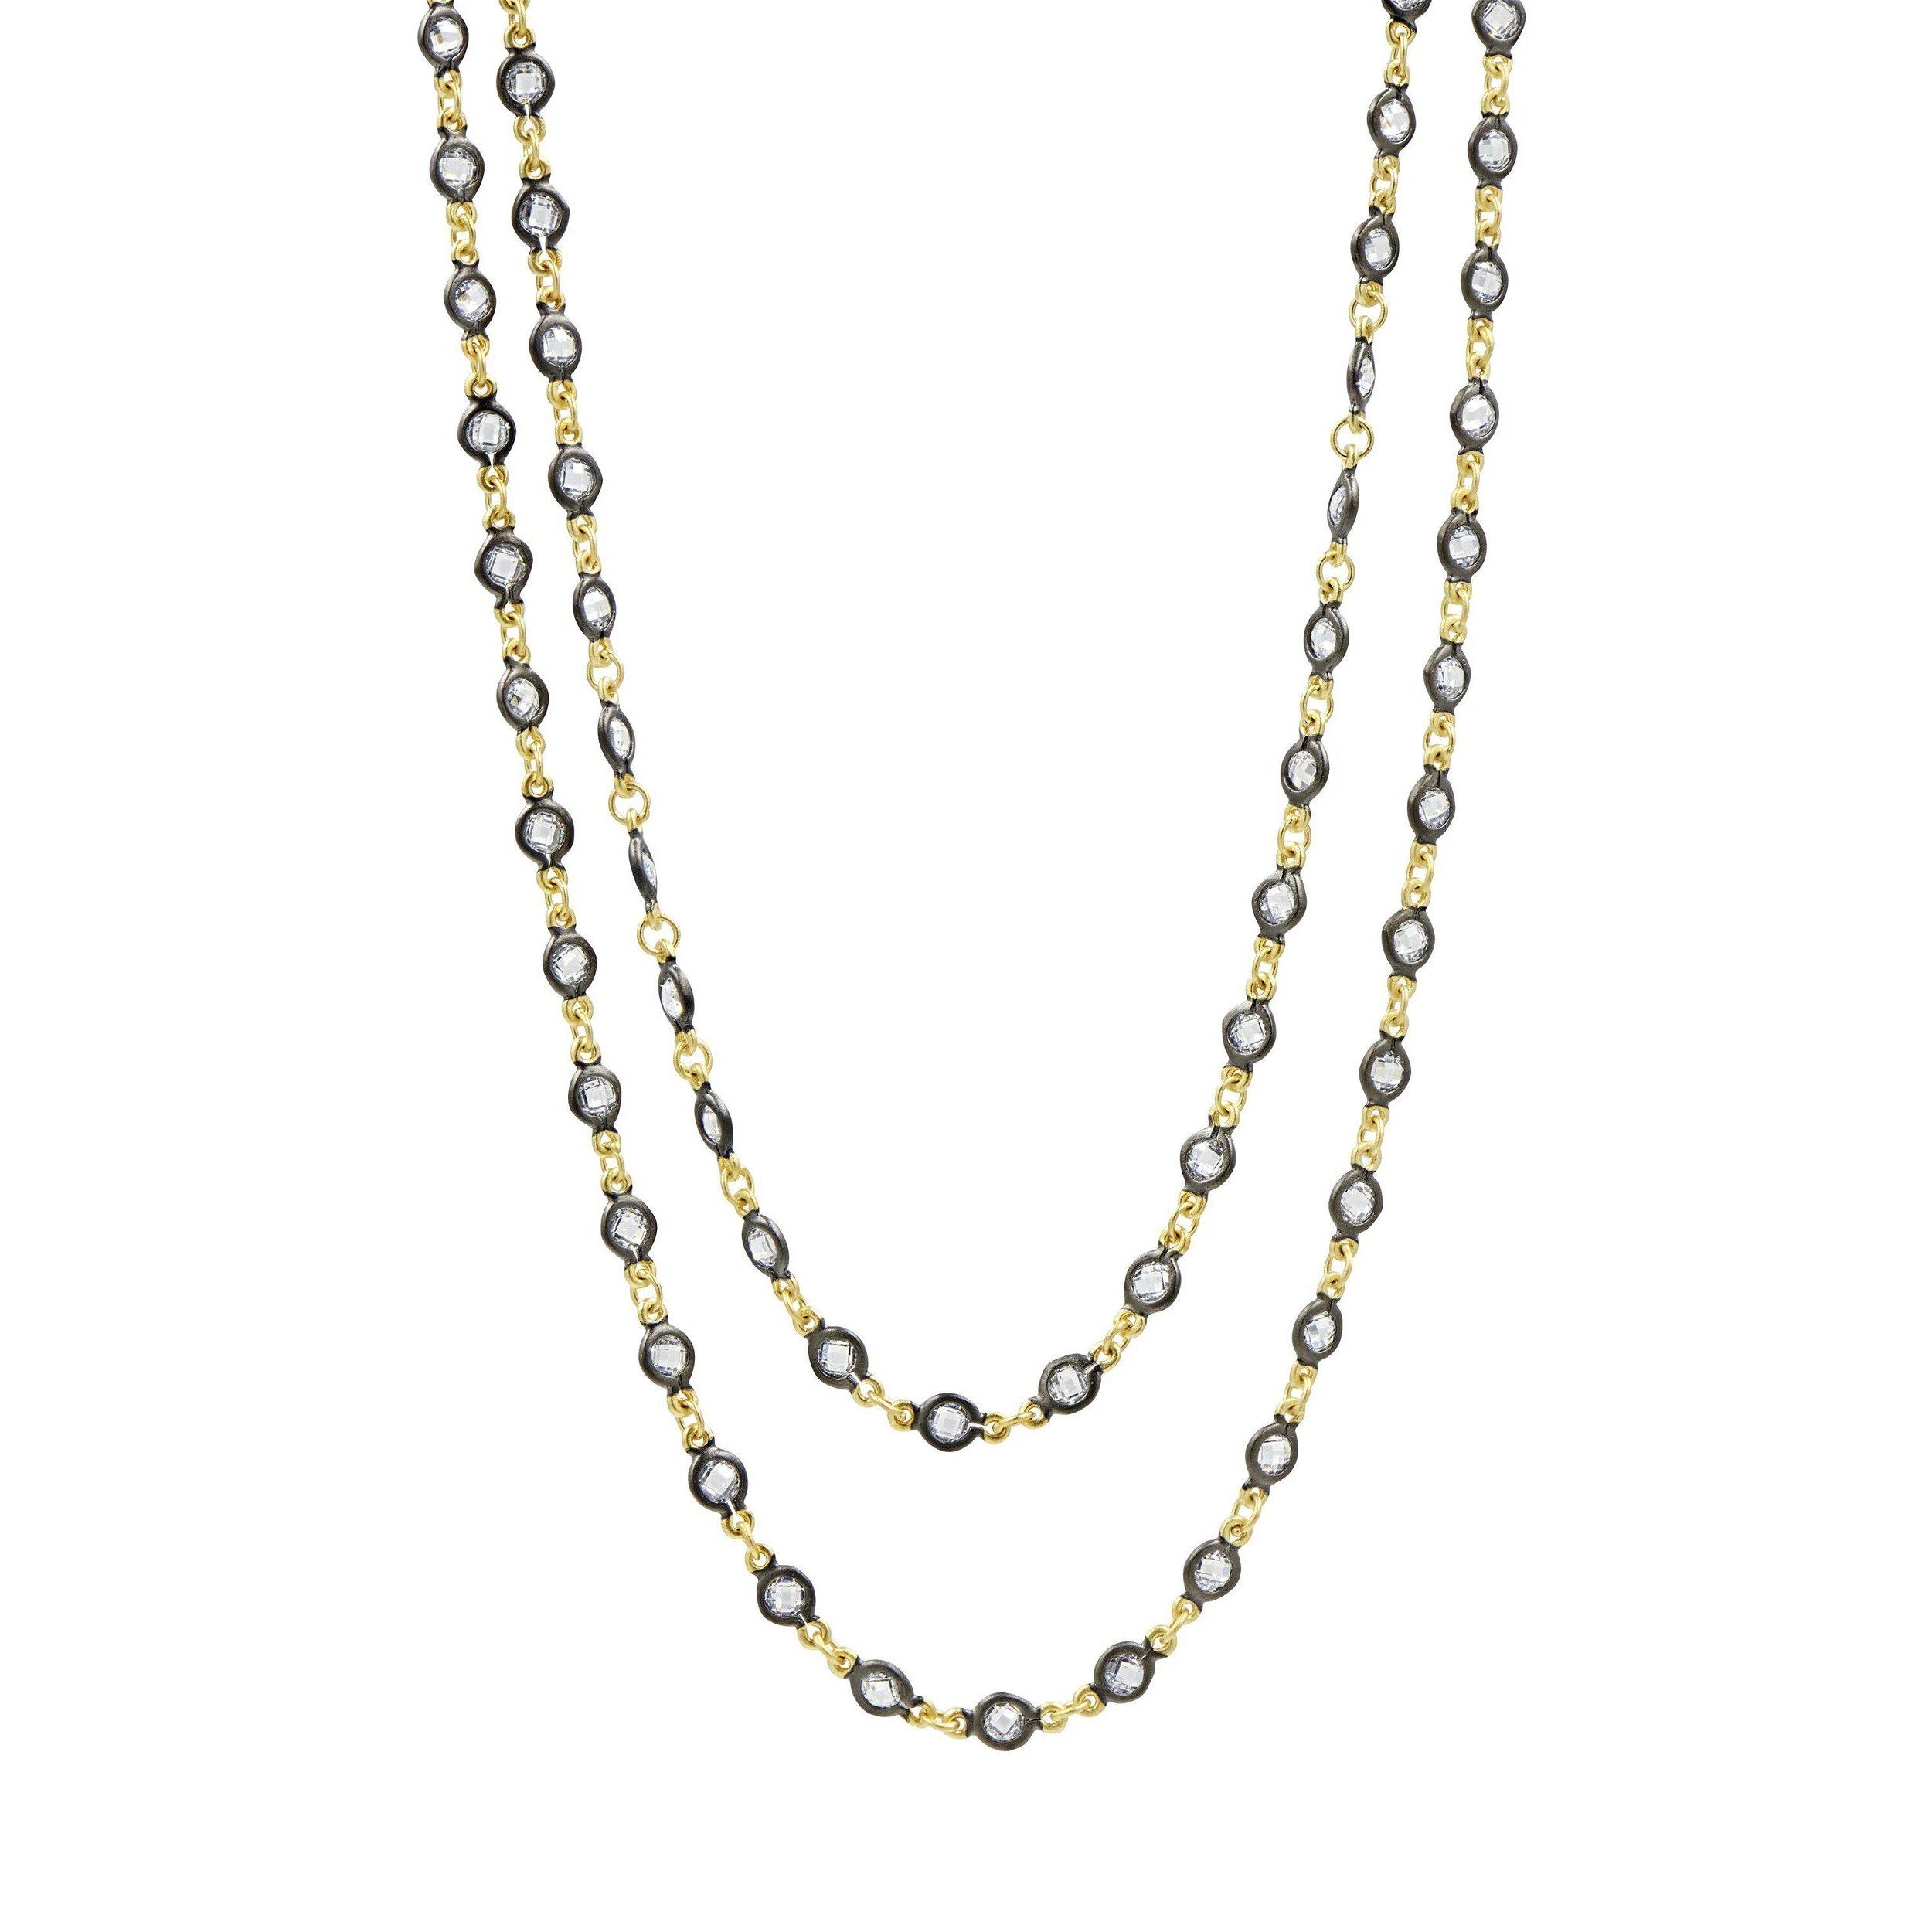 Embellished Wrap Chain Necklace